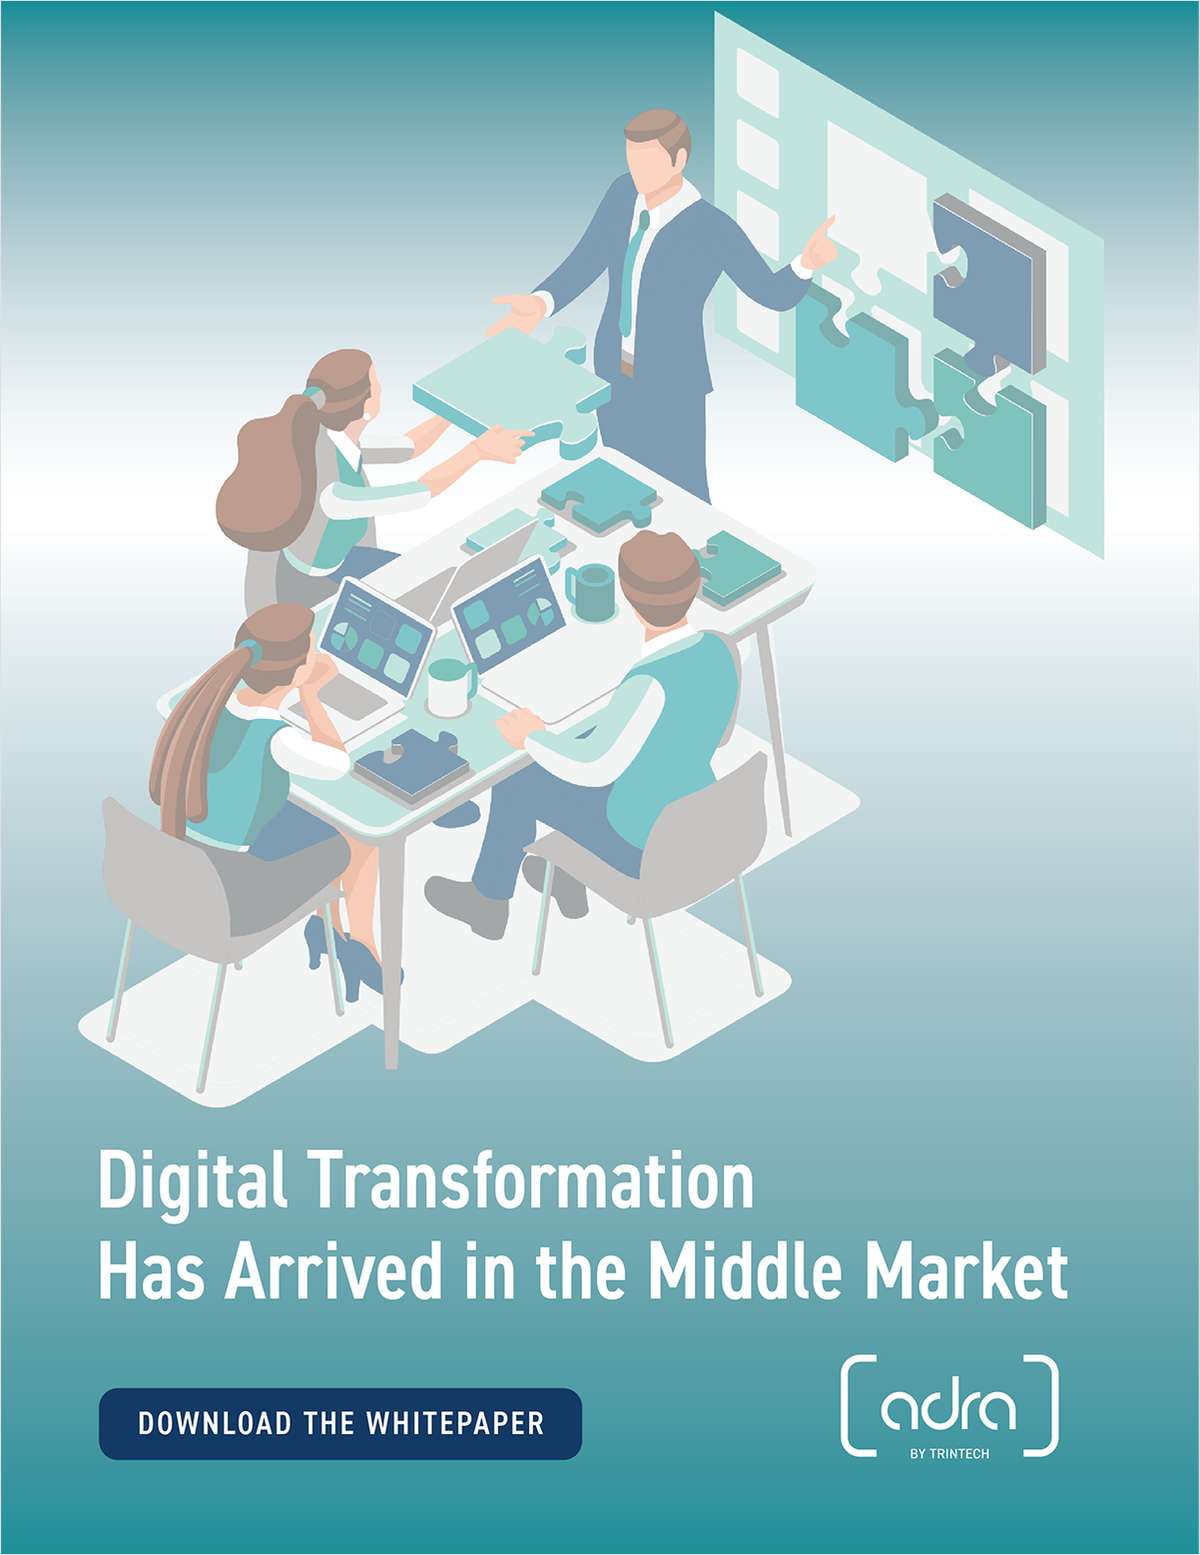 Digital Transformation Has Arrived to the Middle Market